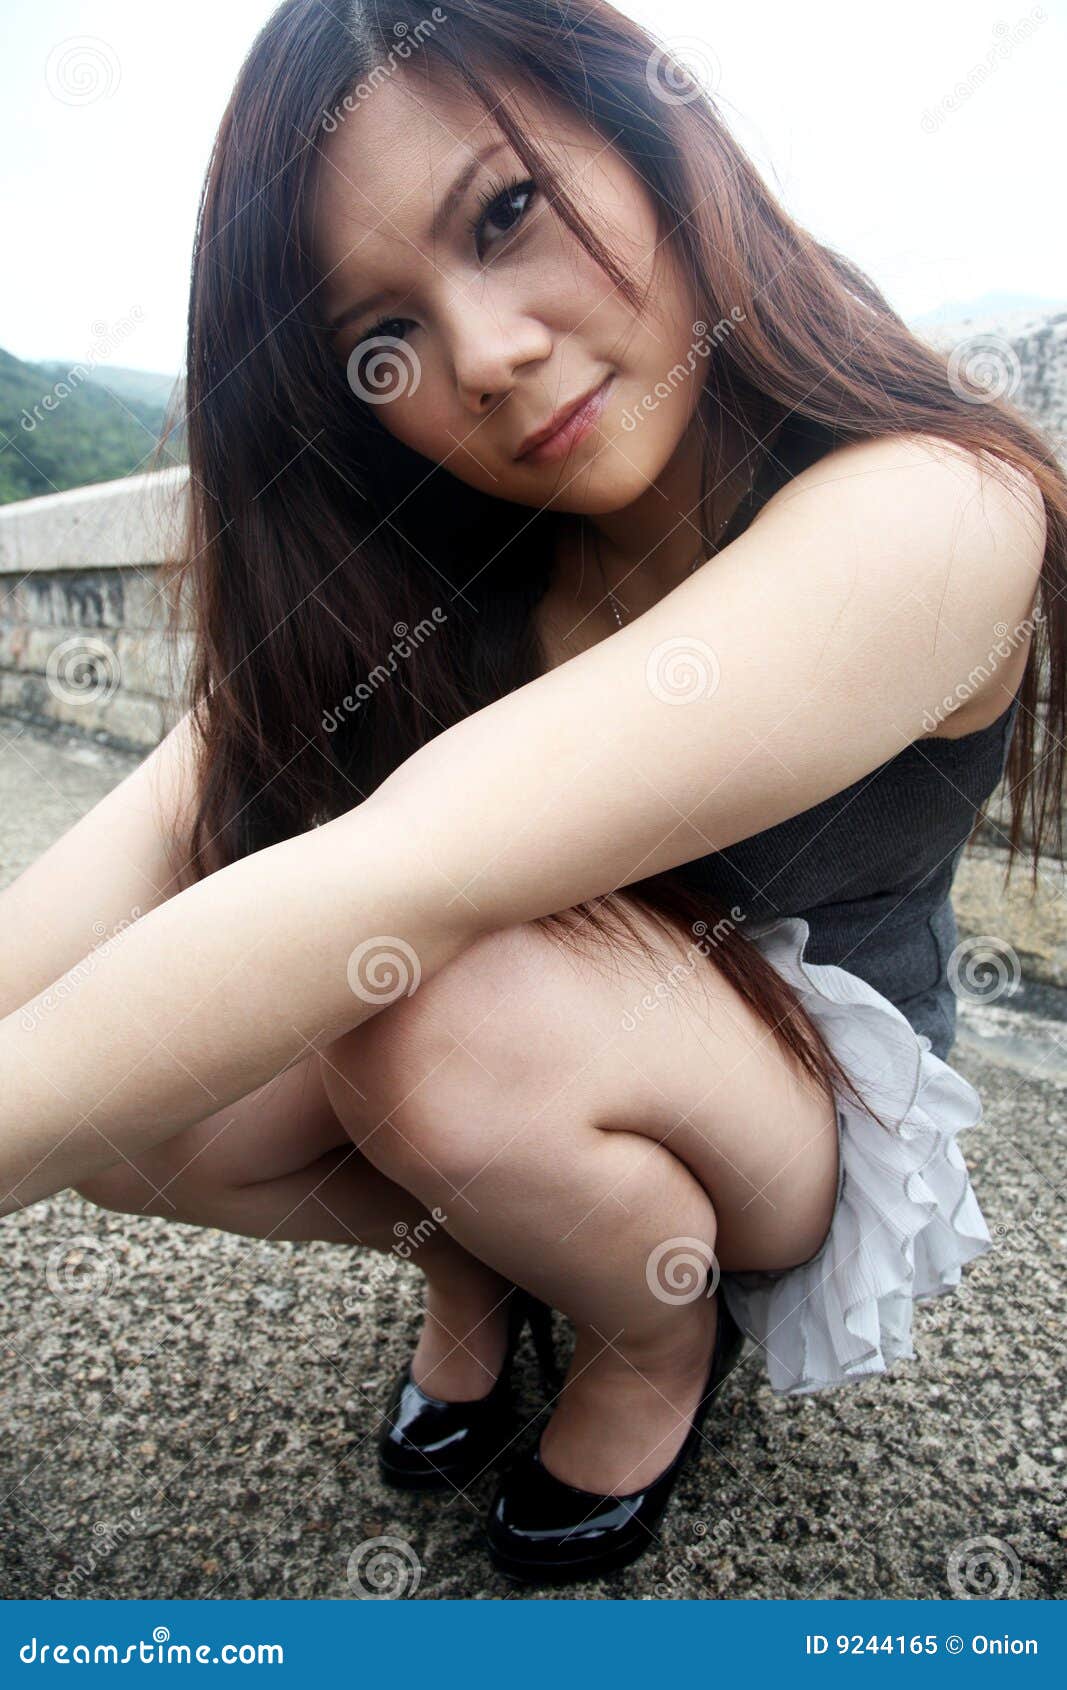 Cute Asian Girl Looking at Viewer Stock Image - Image of figure, makeup:  9244165